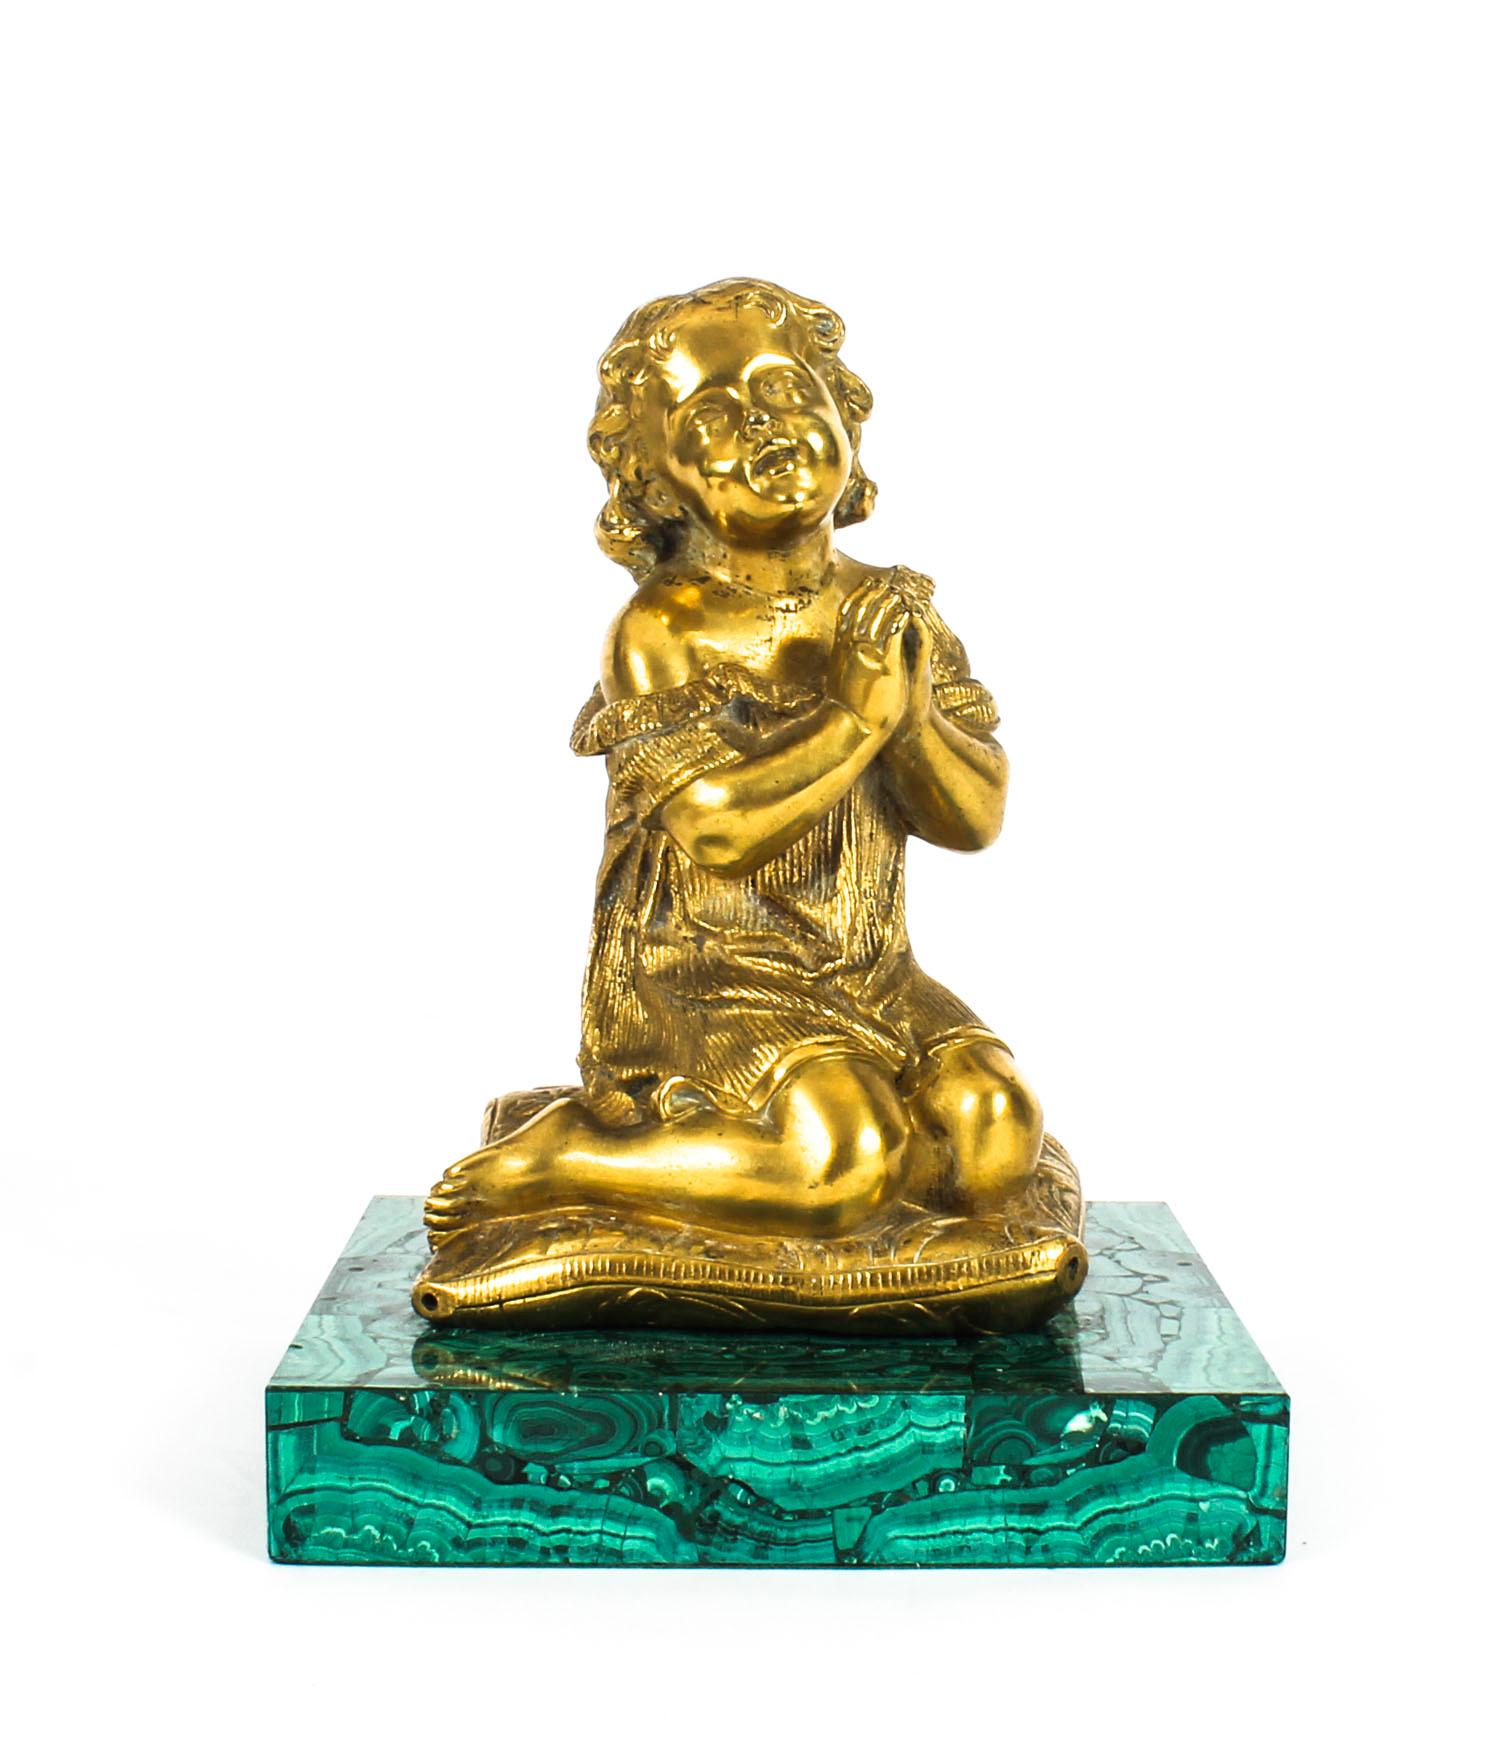 This is a wonderful antique French ormolu and malachite sculpture of a girl, circa 1870 in date.
 
The finely cast ormolu figure of a young girl kneeling in prayer on a cushion sits on an elegant square malachite base.
 
There is no mistaking